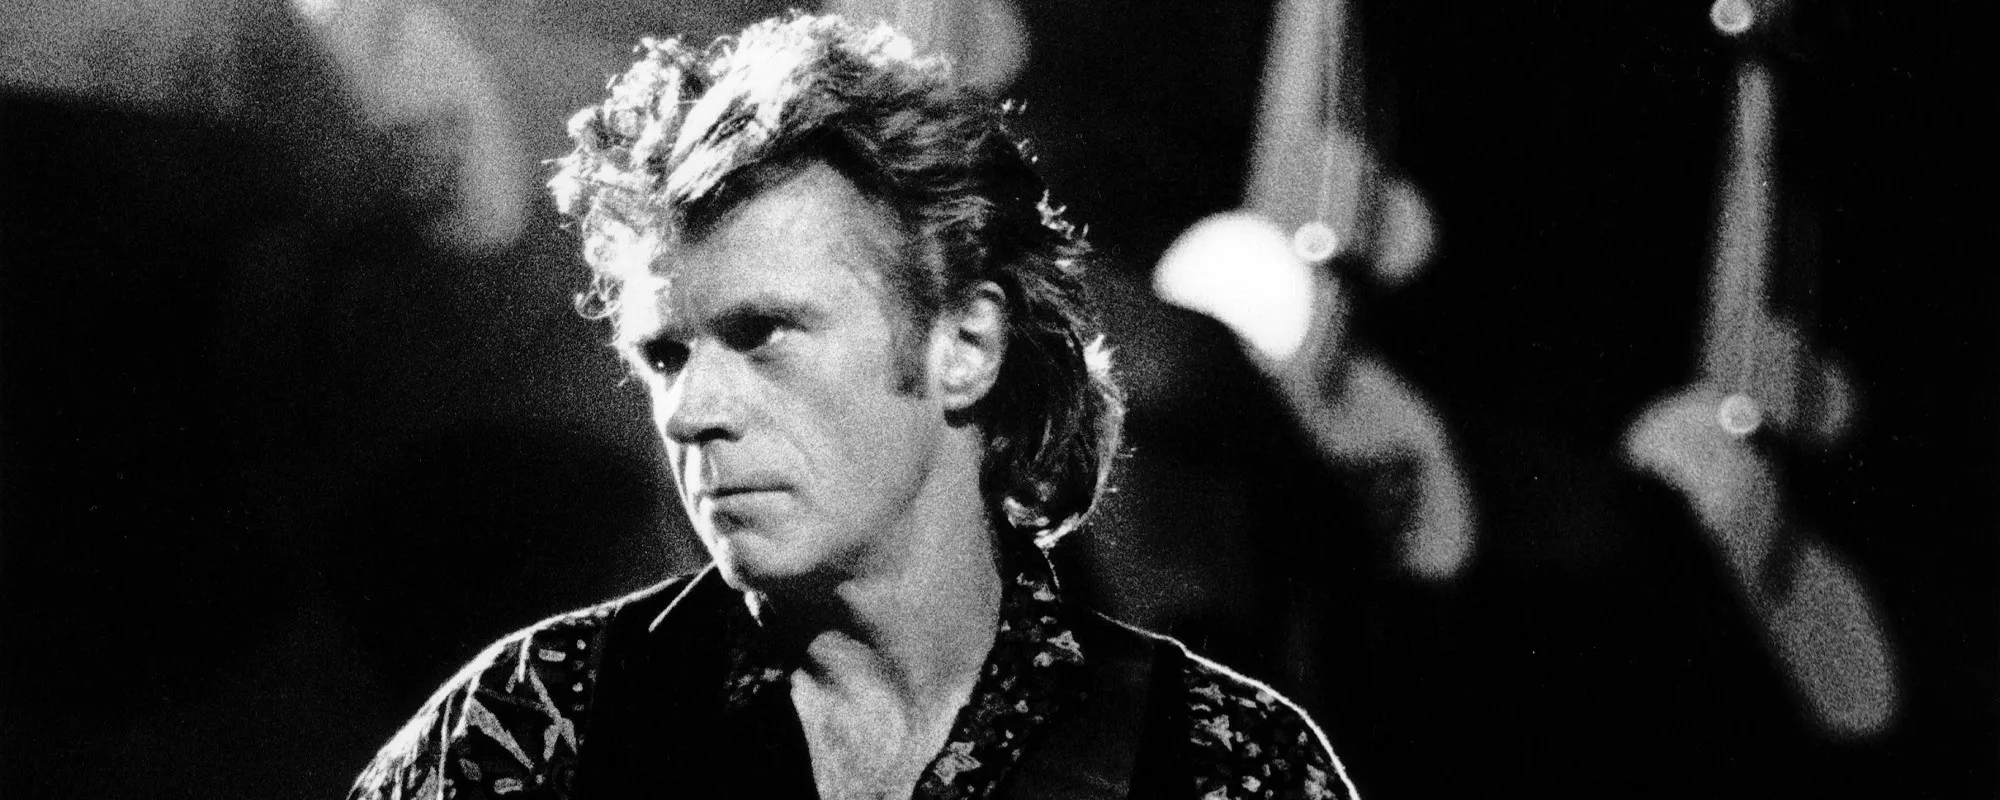 5 Sensational Songs Recorded by Dave Edmunds